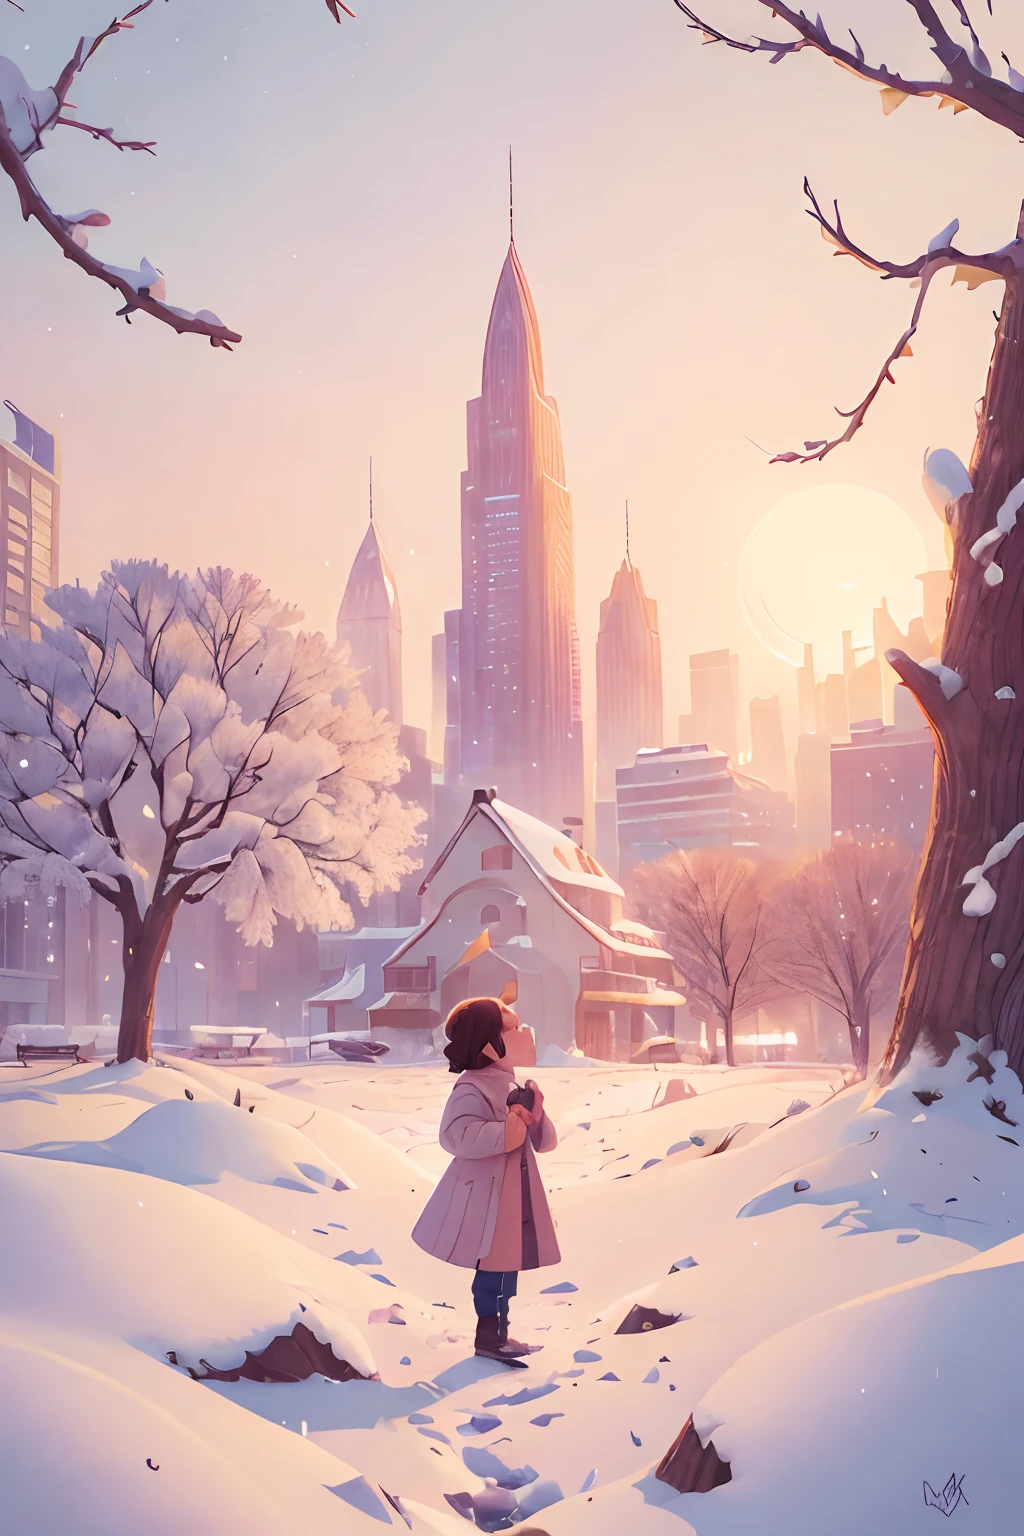 (best quality,4k,8k,highres,masterpiece:1.2),ultra-detailed,(realistic,photorealistic,photo-realistic:1.37),the last sunset before leaving,winter sky at sunset,soft colors,pink orange,blue,mist,rows of trees and buildings,peaceful atmosphere,serene winter landscape,subtle hues,receding sunlight,golden hour,quiet streets,gentle breeze,kiss of warmth,city silhouette,icy branches,elegant architecture,wistful mood,majestic skyline,little snowflakes dancing,final goodbye.